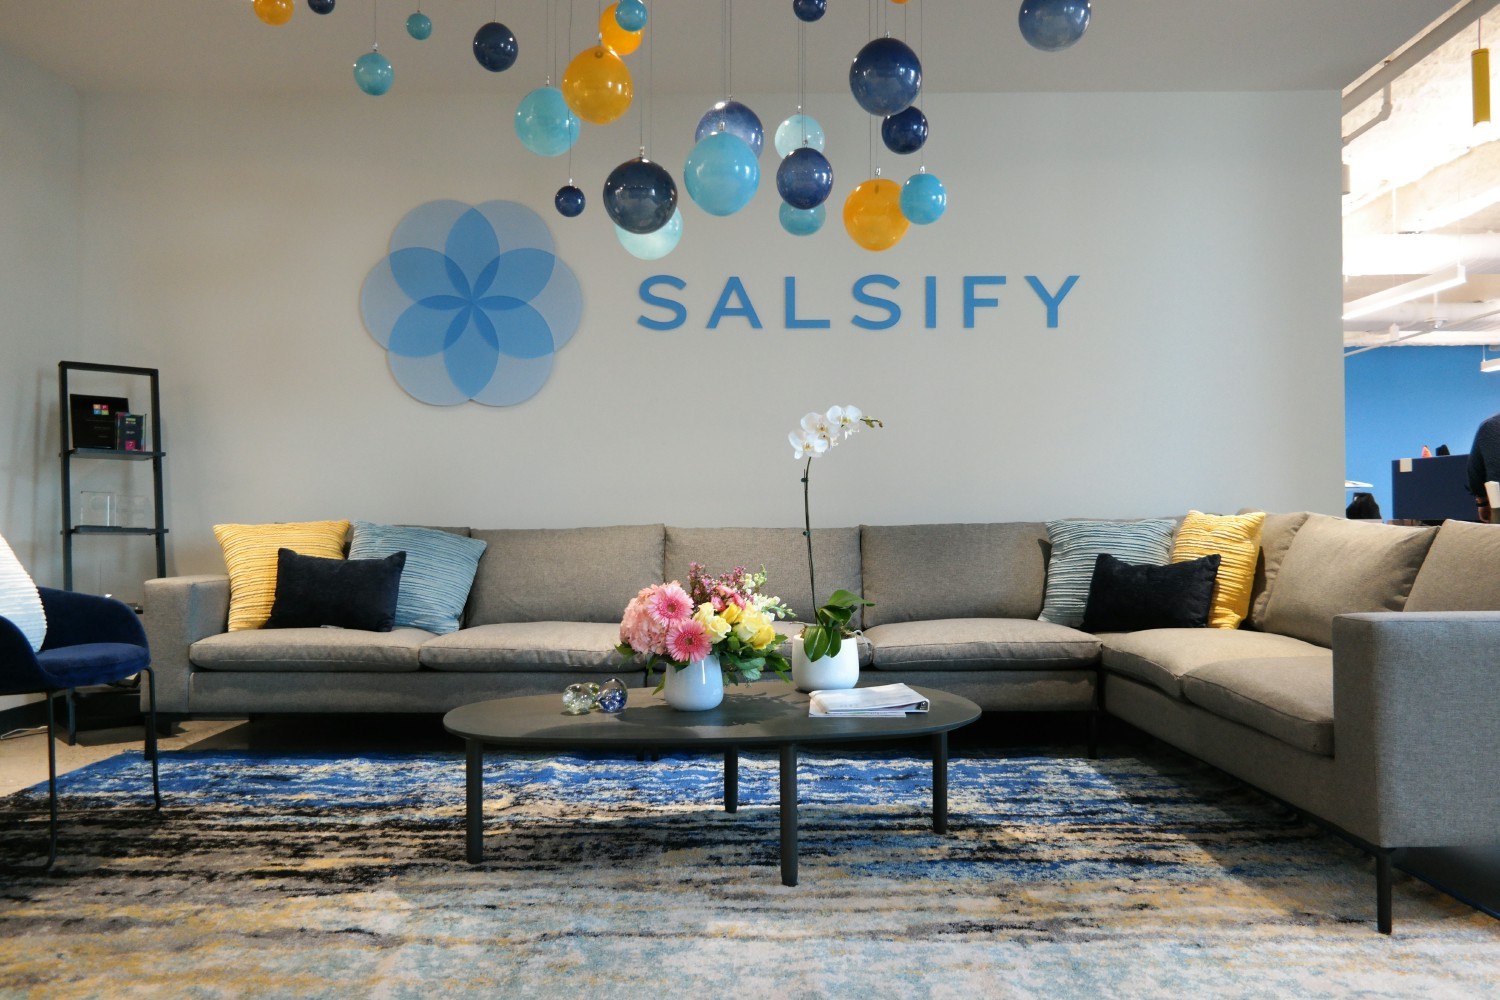 Welcome to Salsify's Boston HQ!